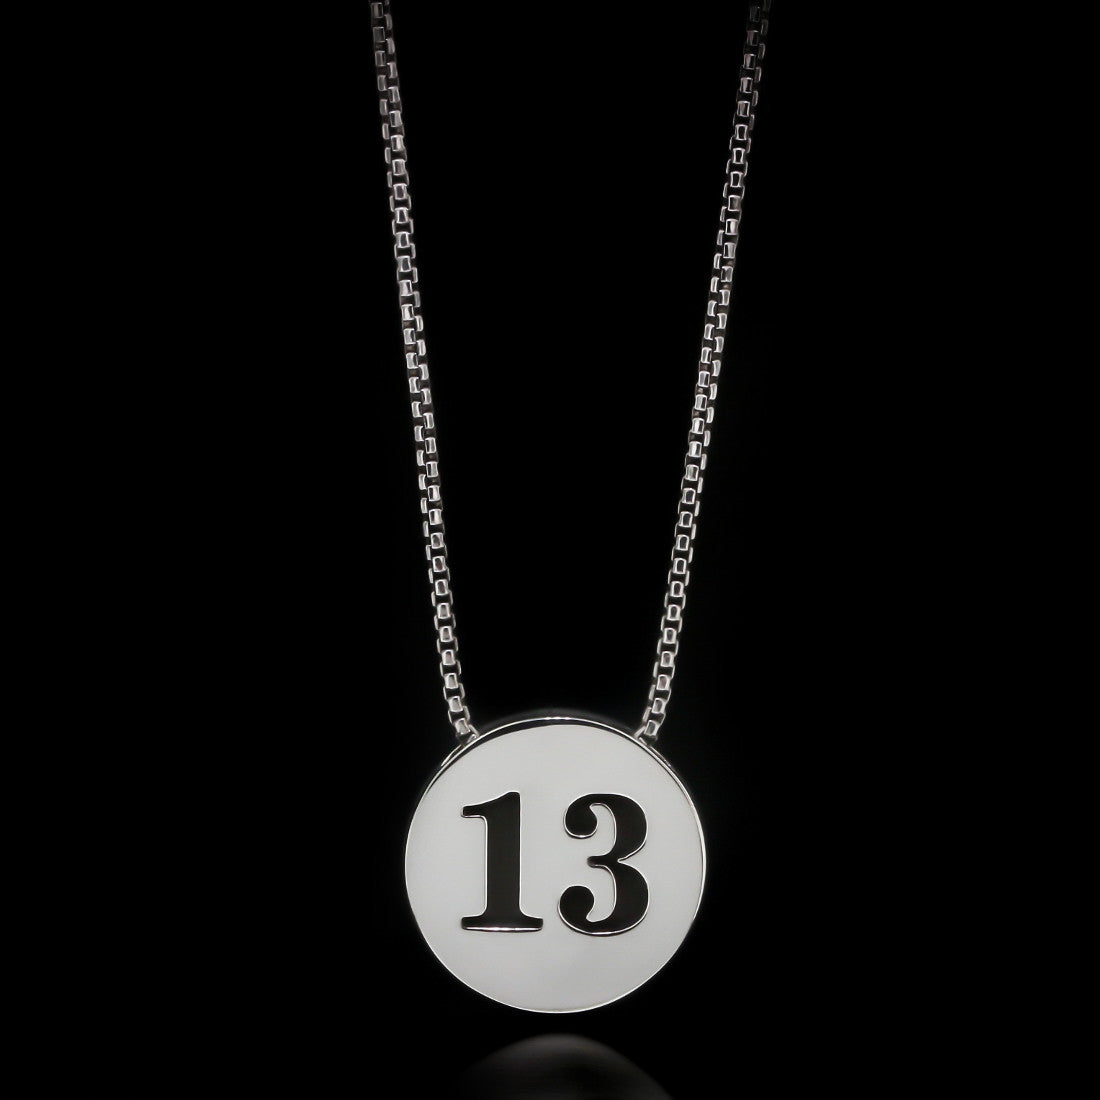 13 Slider Necklace - Sterling Silver - Twisted Love NYC